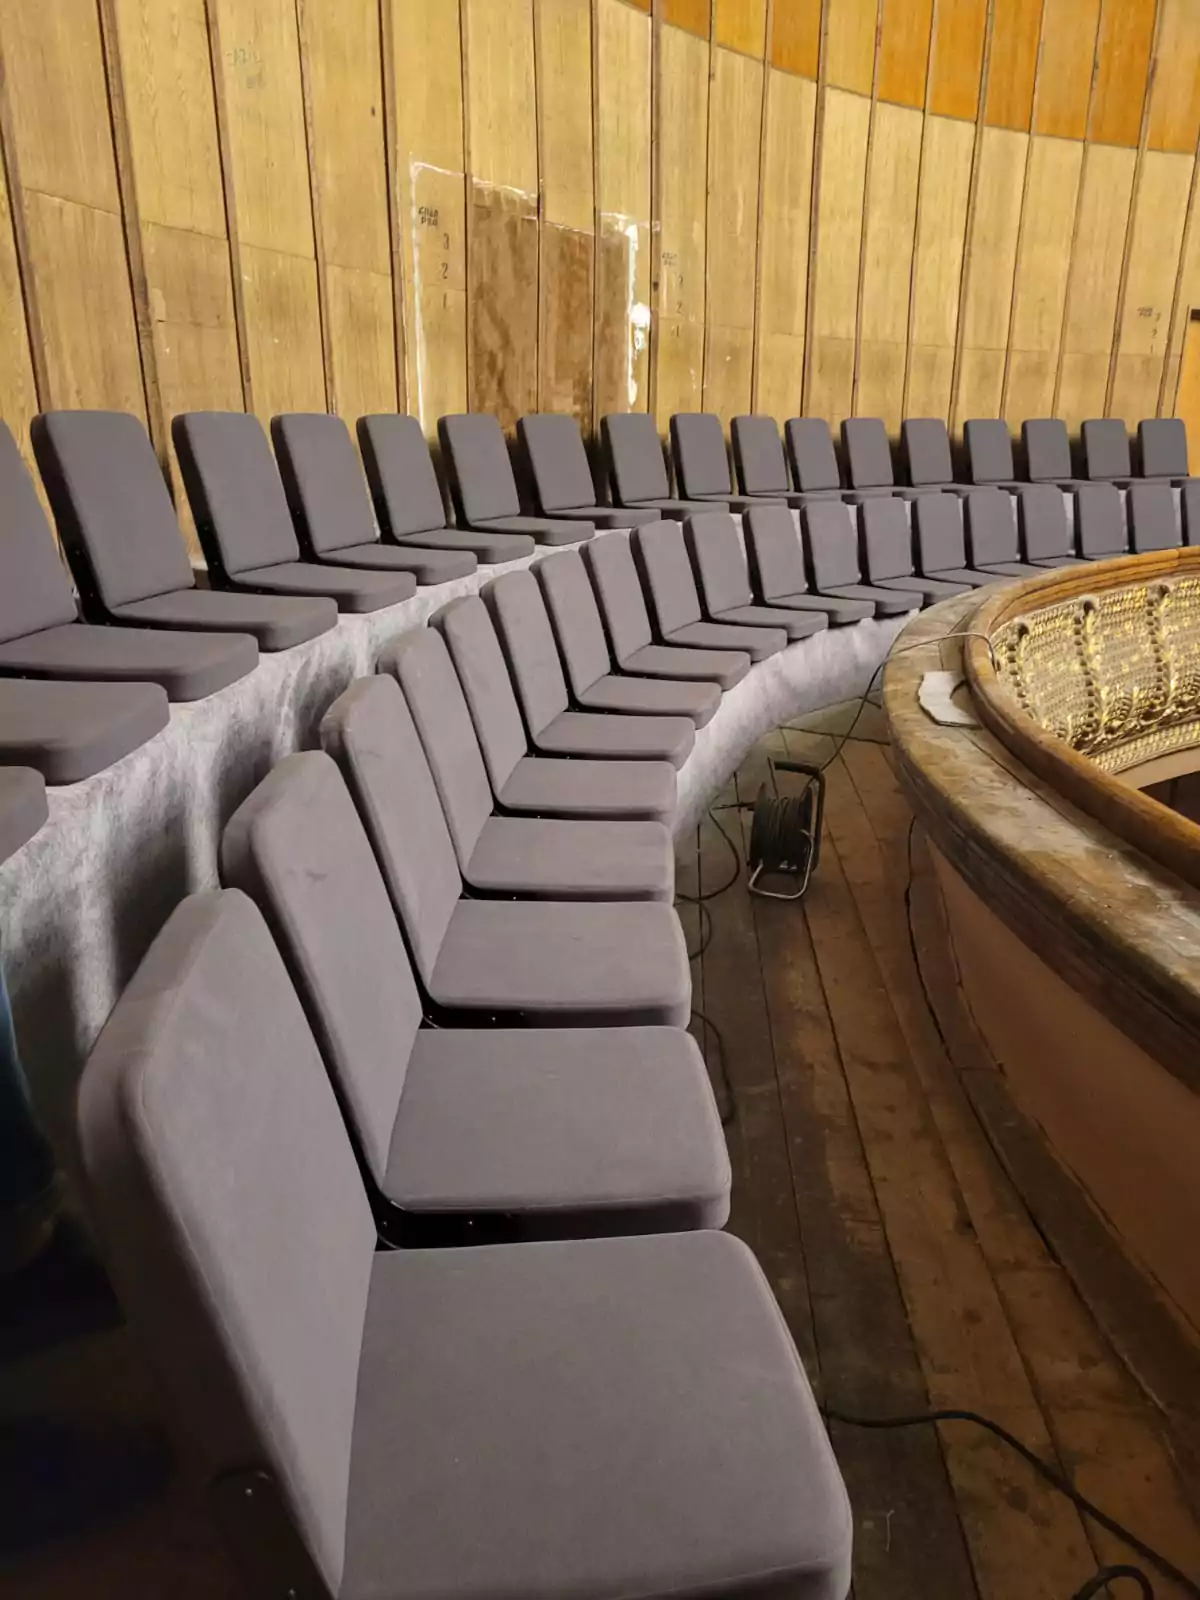 Monseat's Eco-Friendly Conference and Auditorium Seating Solutions - Blog Image